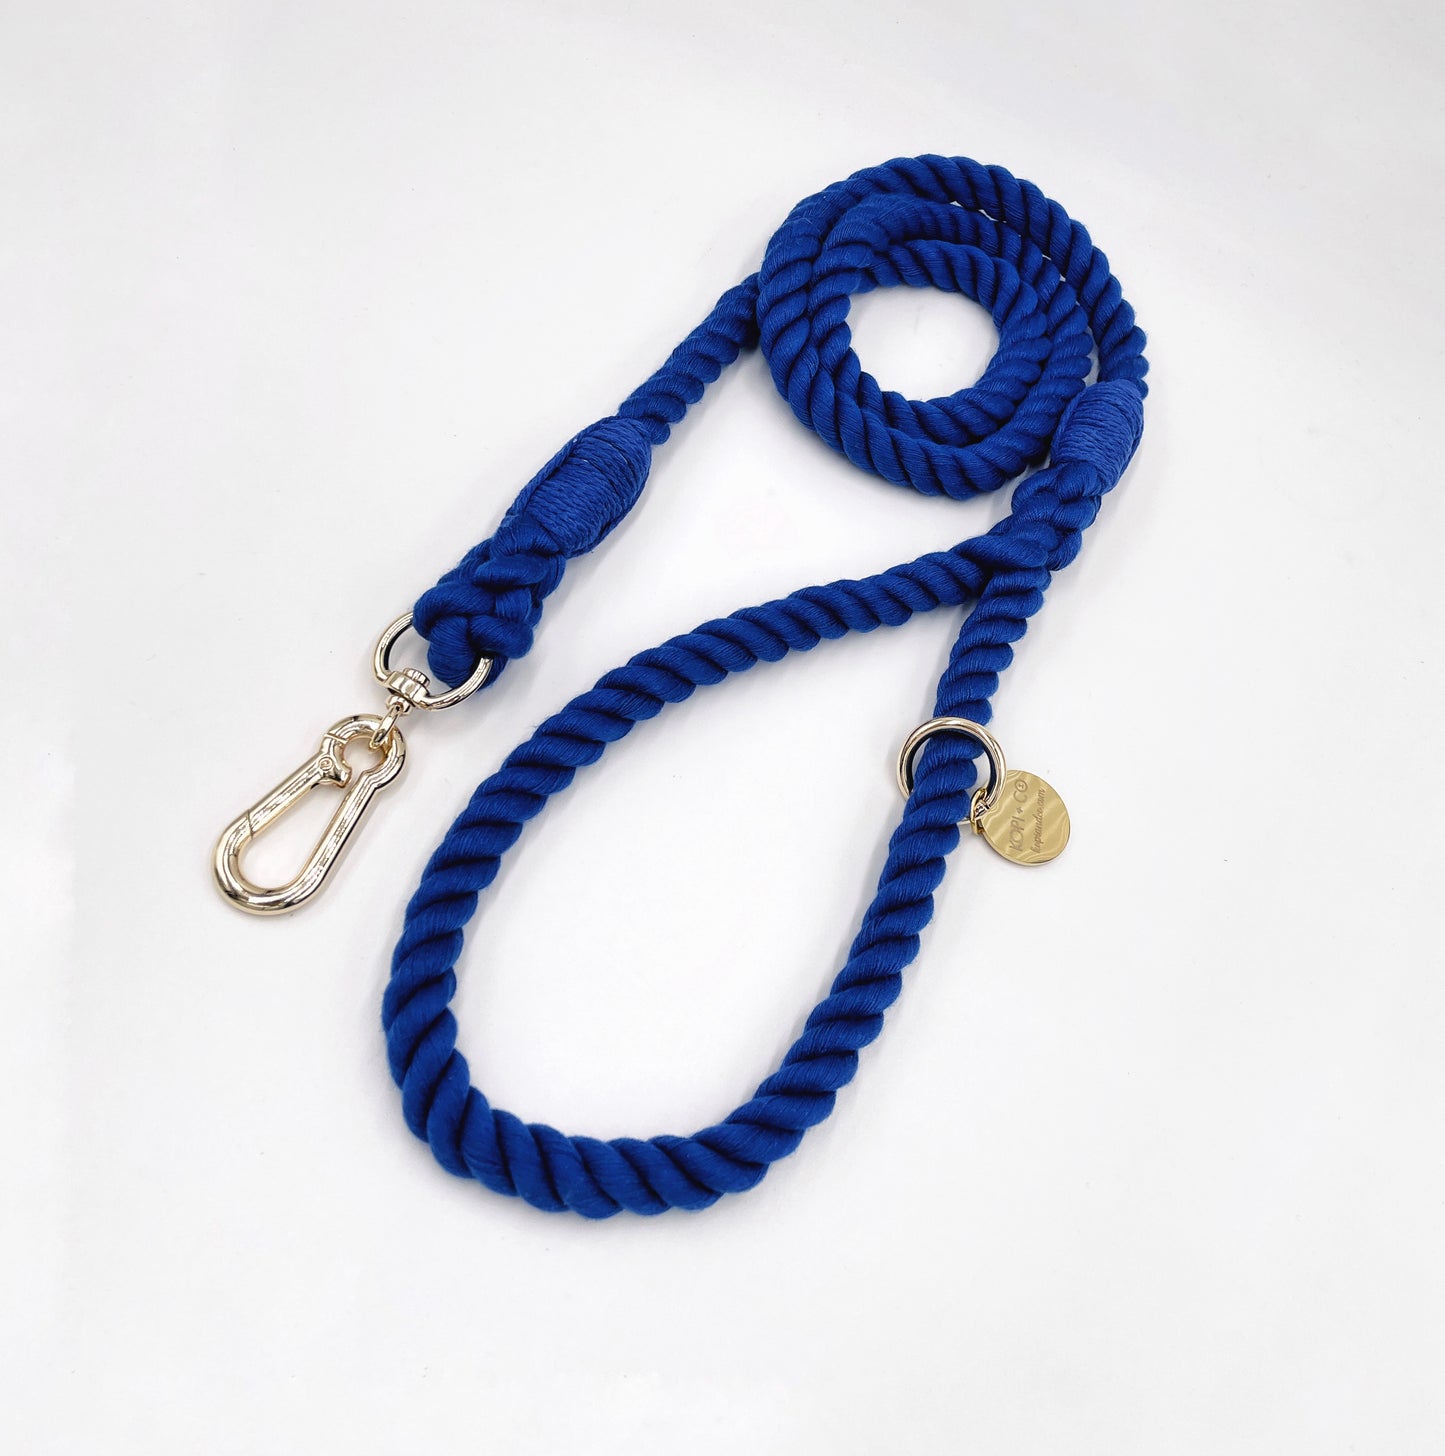 Cotton Rope Lead - Royal Blue